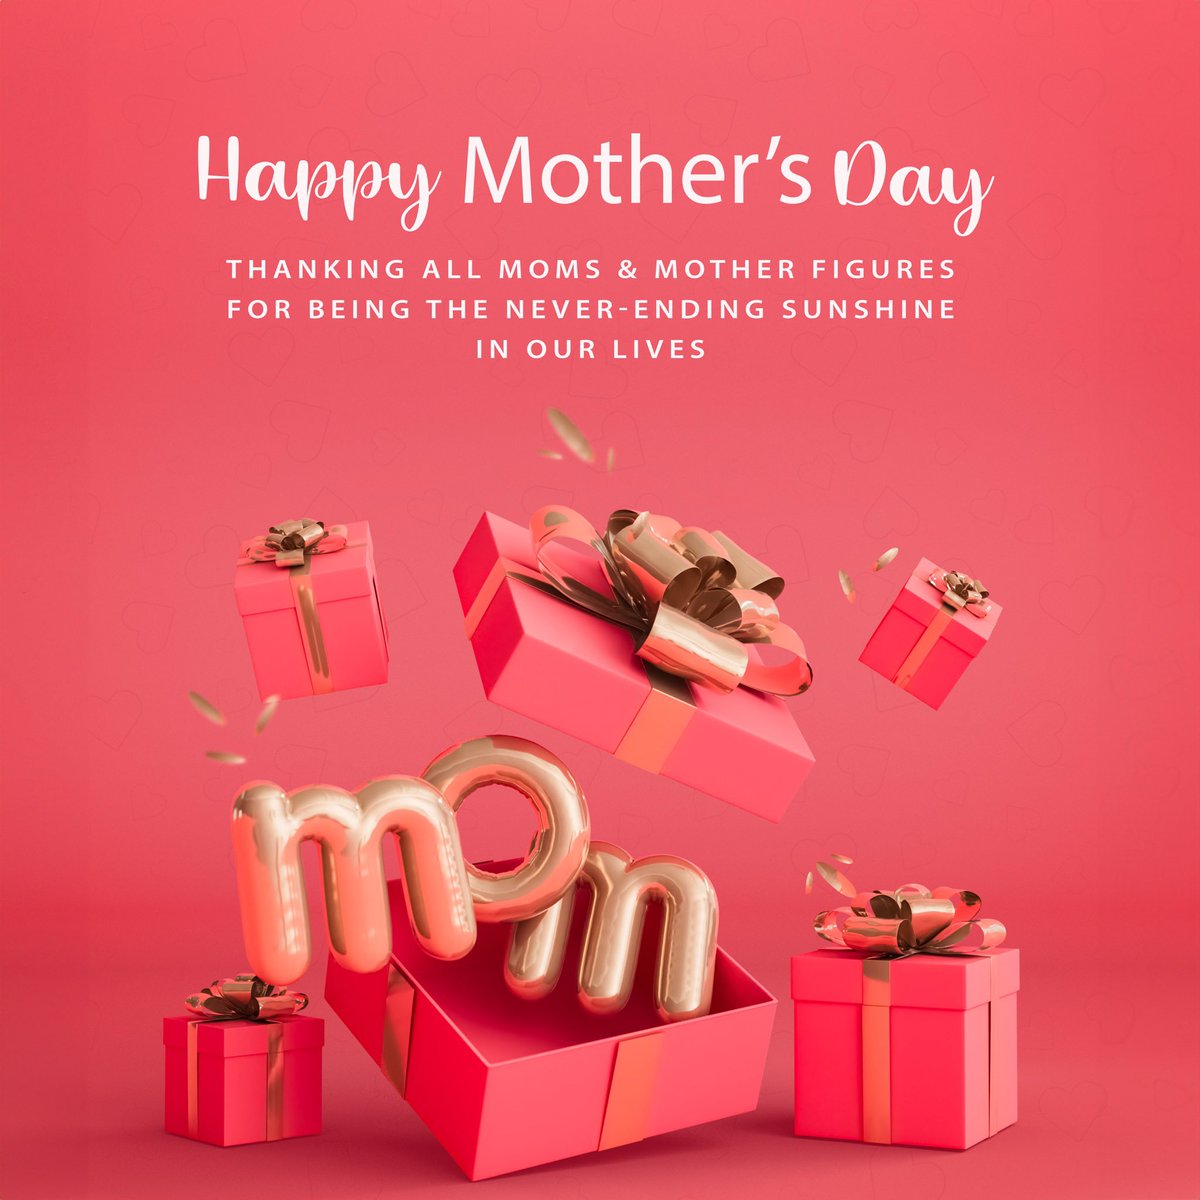 Celebrating the amazing mothers and mother figures today and everyday 👏.  Happy Mother's Day! 
.
#happymothersday #iluvia #iluviapro #celebrate #mothers #mothersday #selfcare